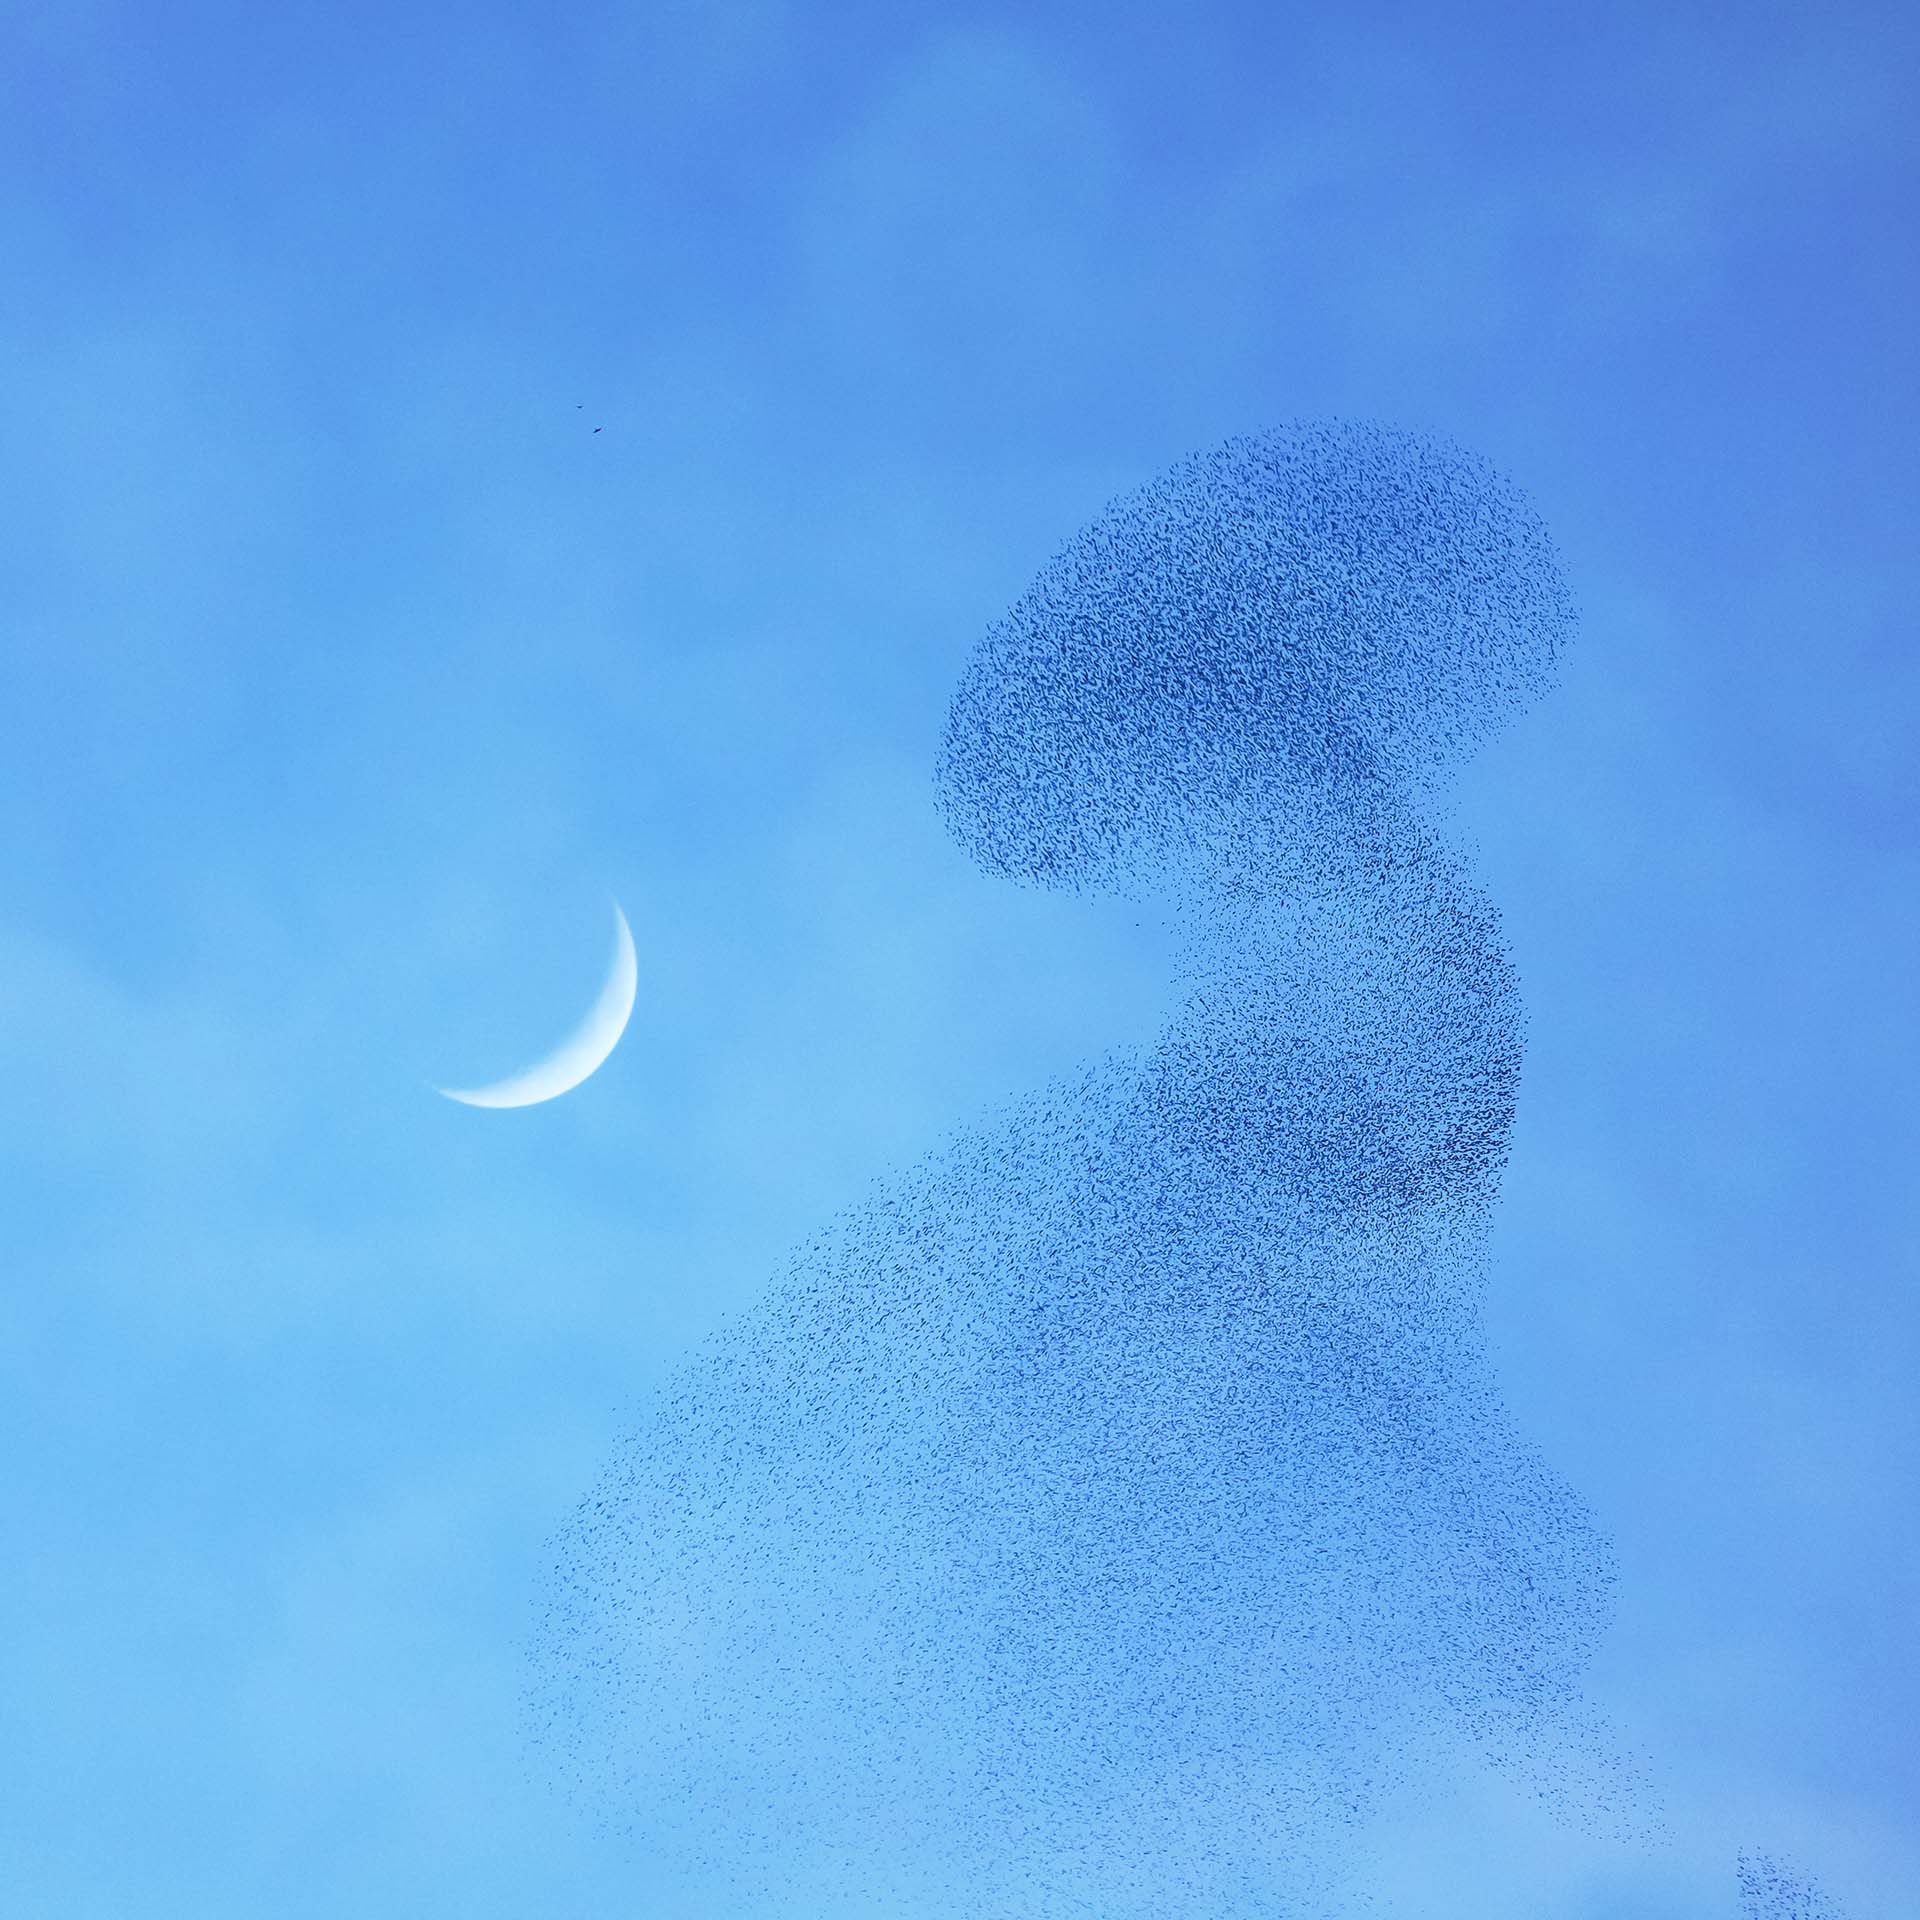 light blue sky with crescent moon and a murmuration of starlings